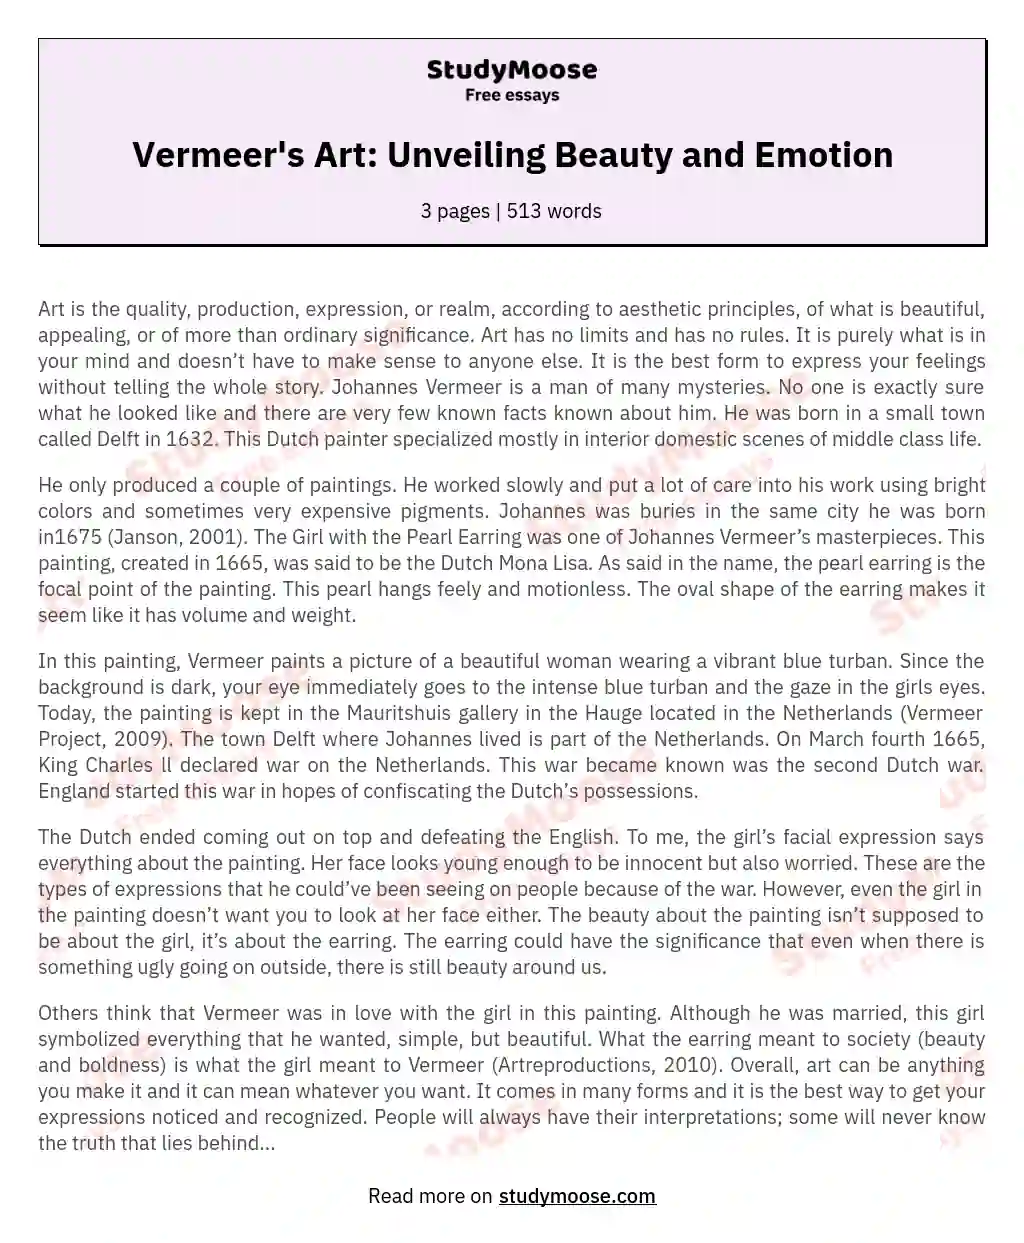 Vermeer's Art: Unveiling Beauty and Emotion essay